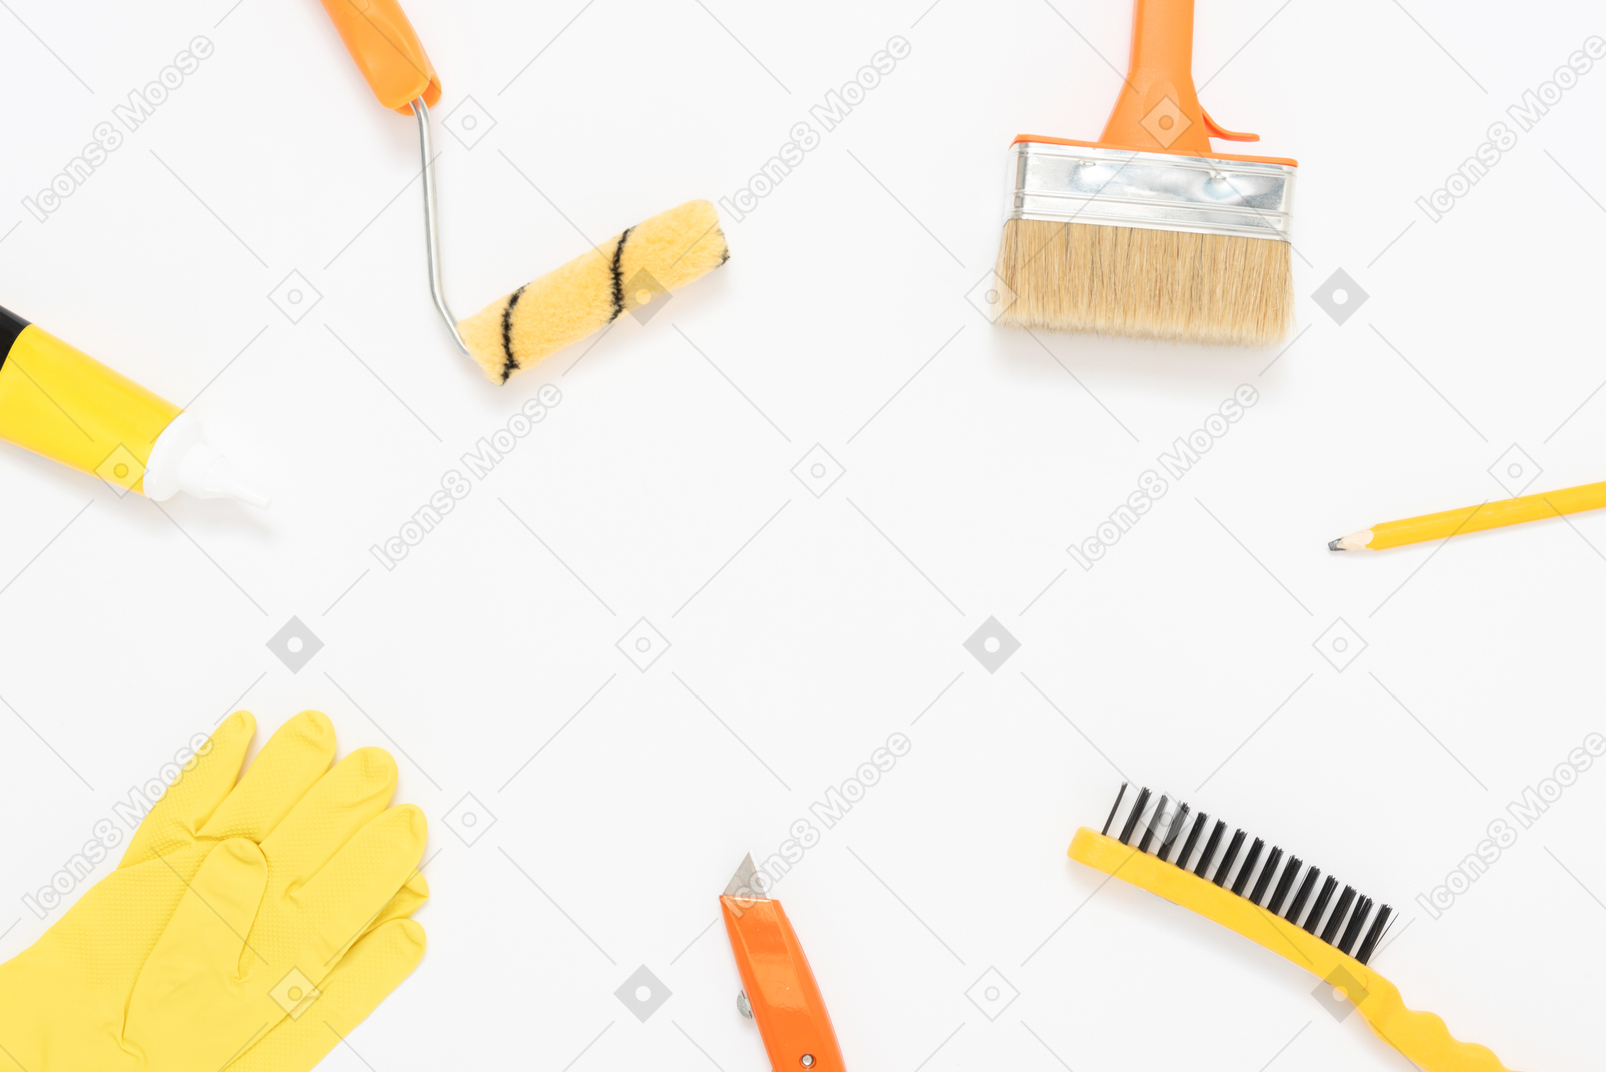 A set of painting tools arranged in a circle on the white background